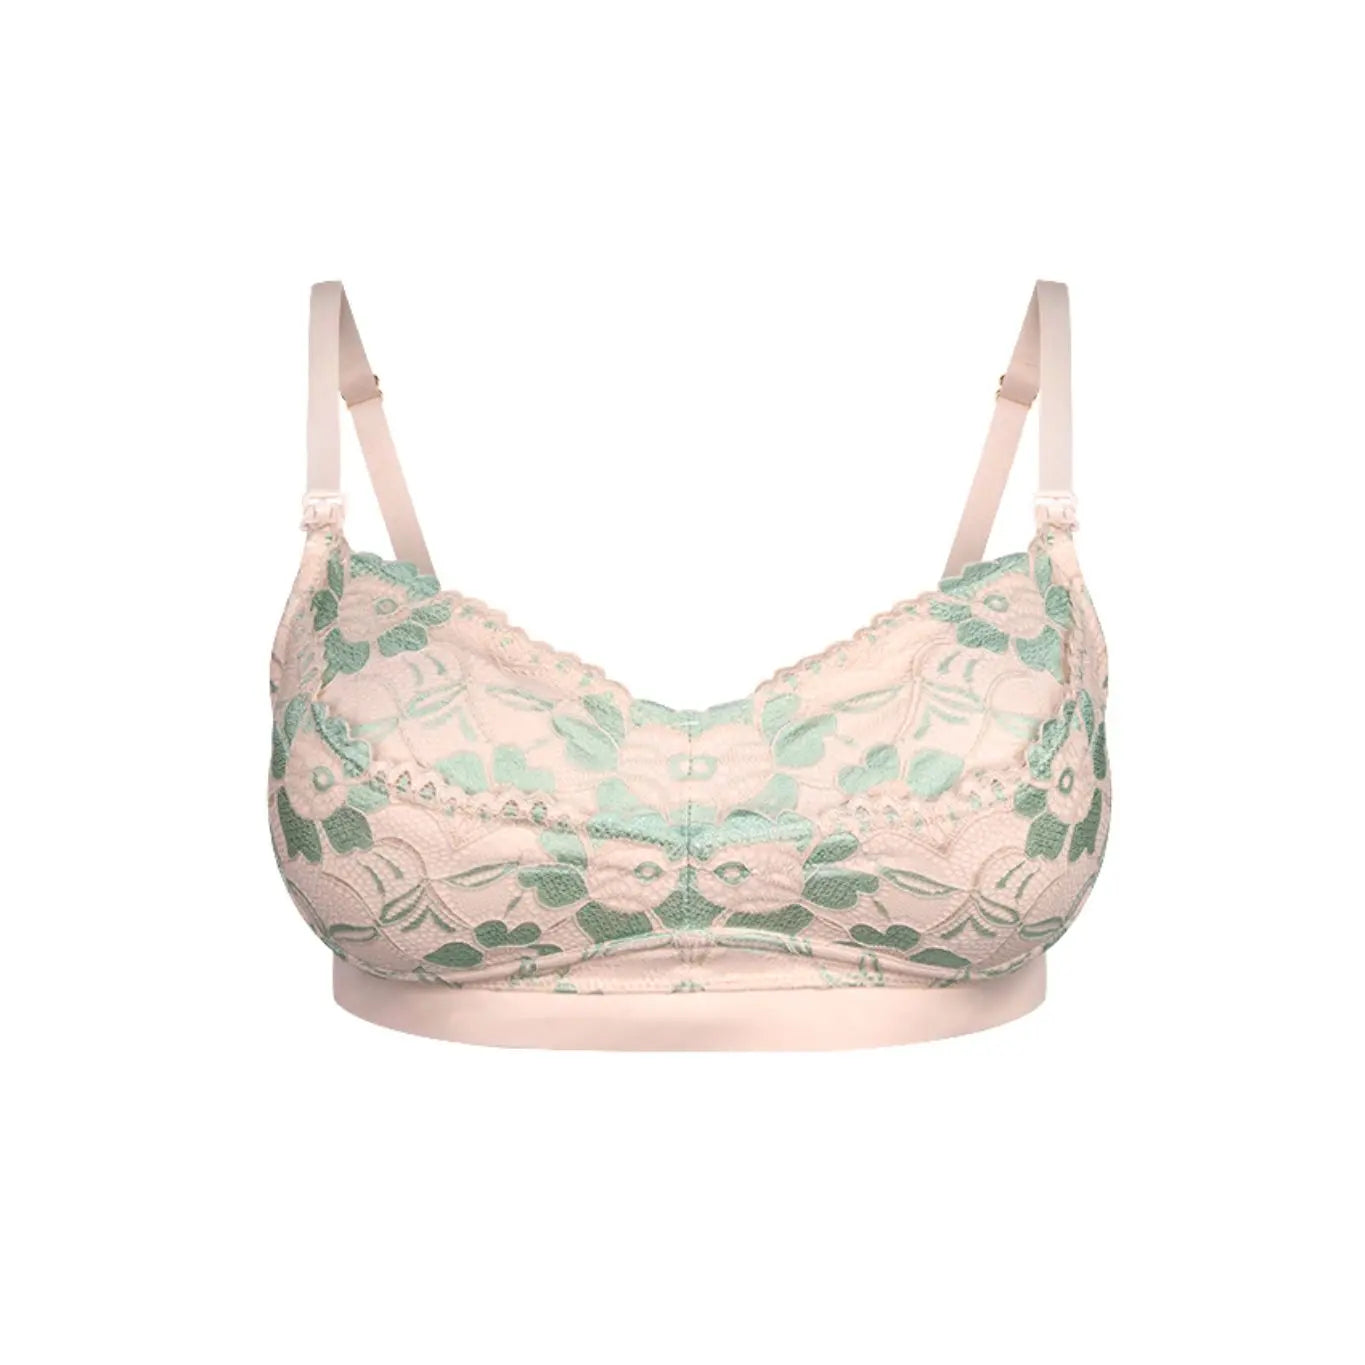 Born in Ukraine Lace Bralette in Nude with pink shade